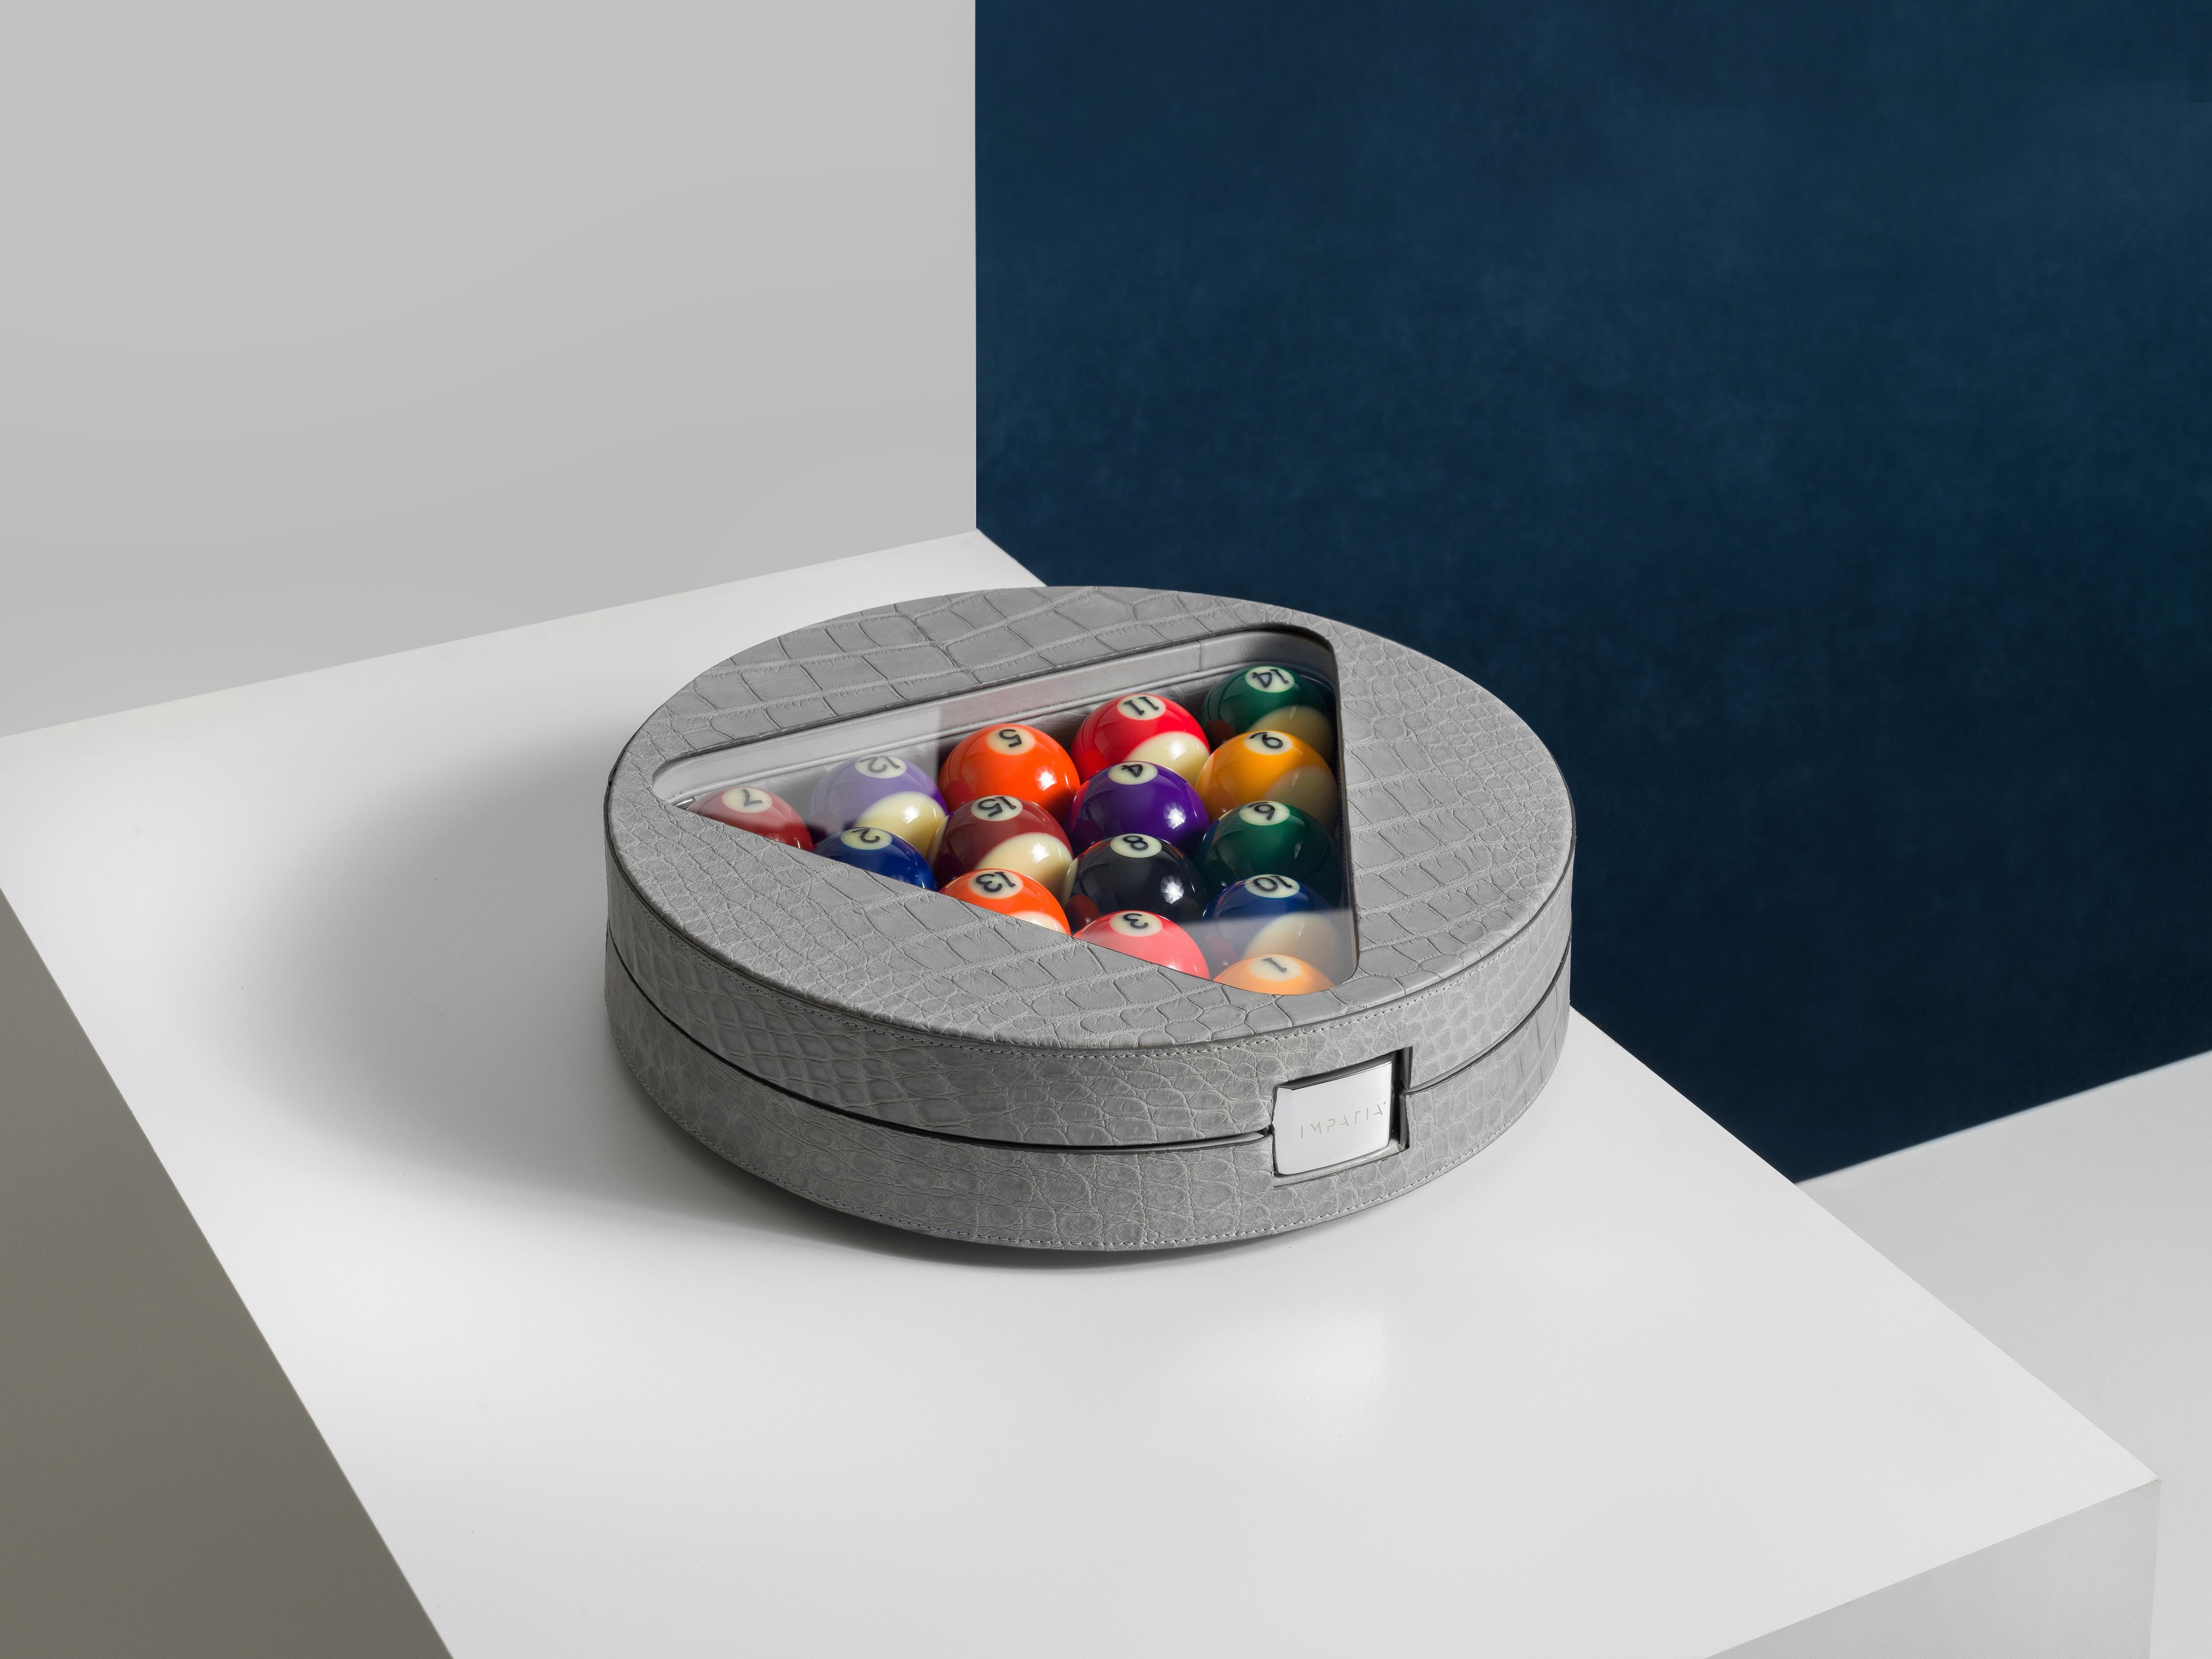 With a continued desire to push the boundaries of luxury design within the game table industry, IMPATIA unveils a brand new contemporary billiards set crafted from genuine crocodile skin. Designed by the IMPATIA R&D team, this bespoke game set is